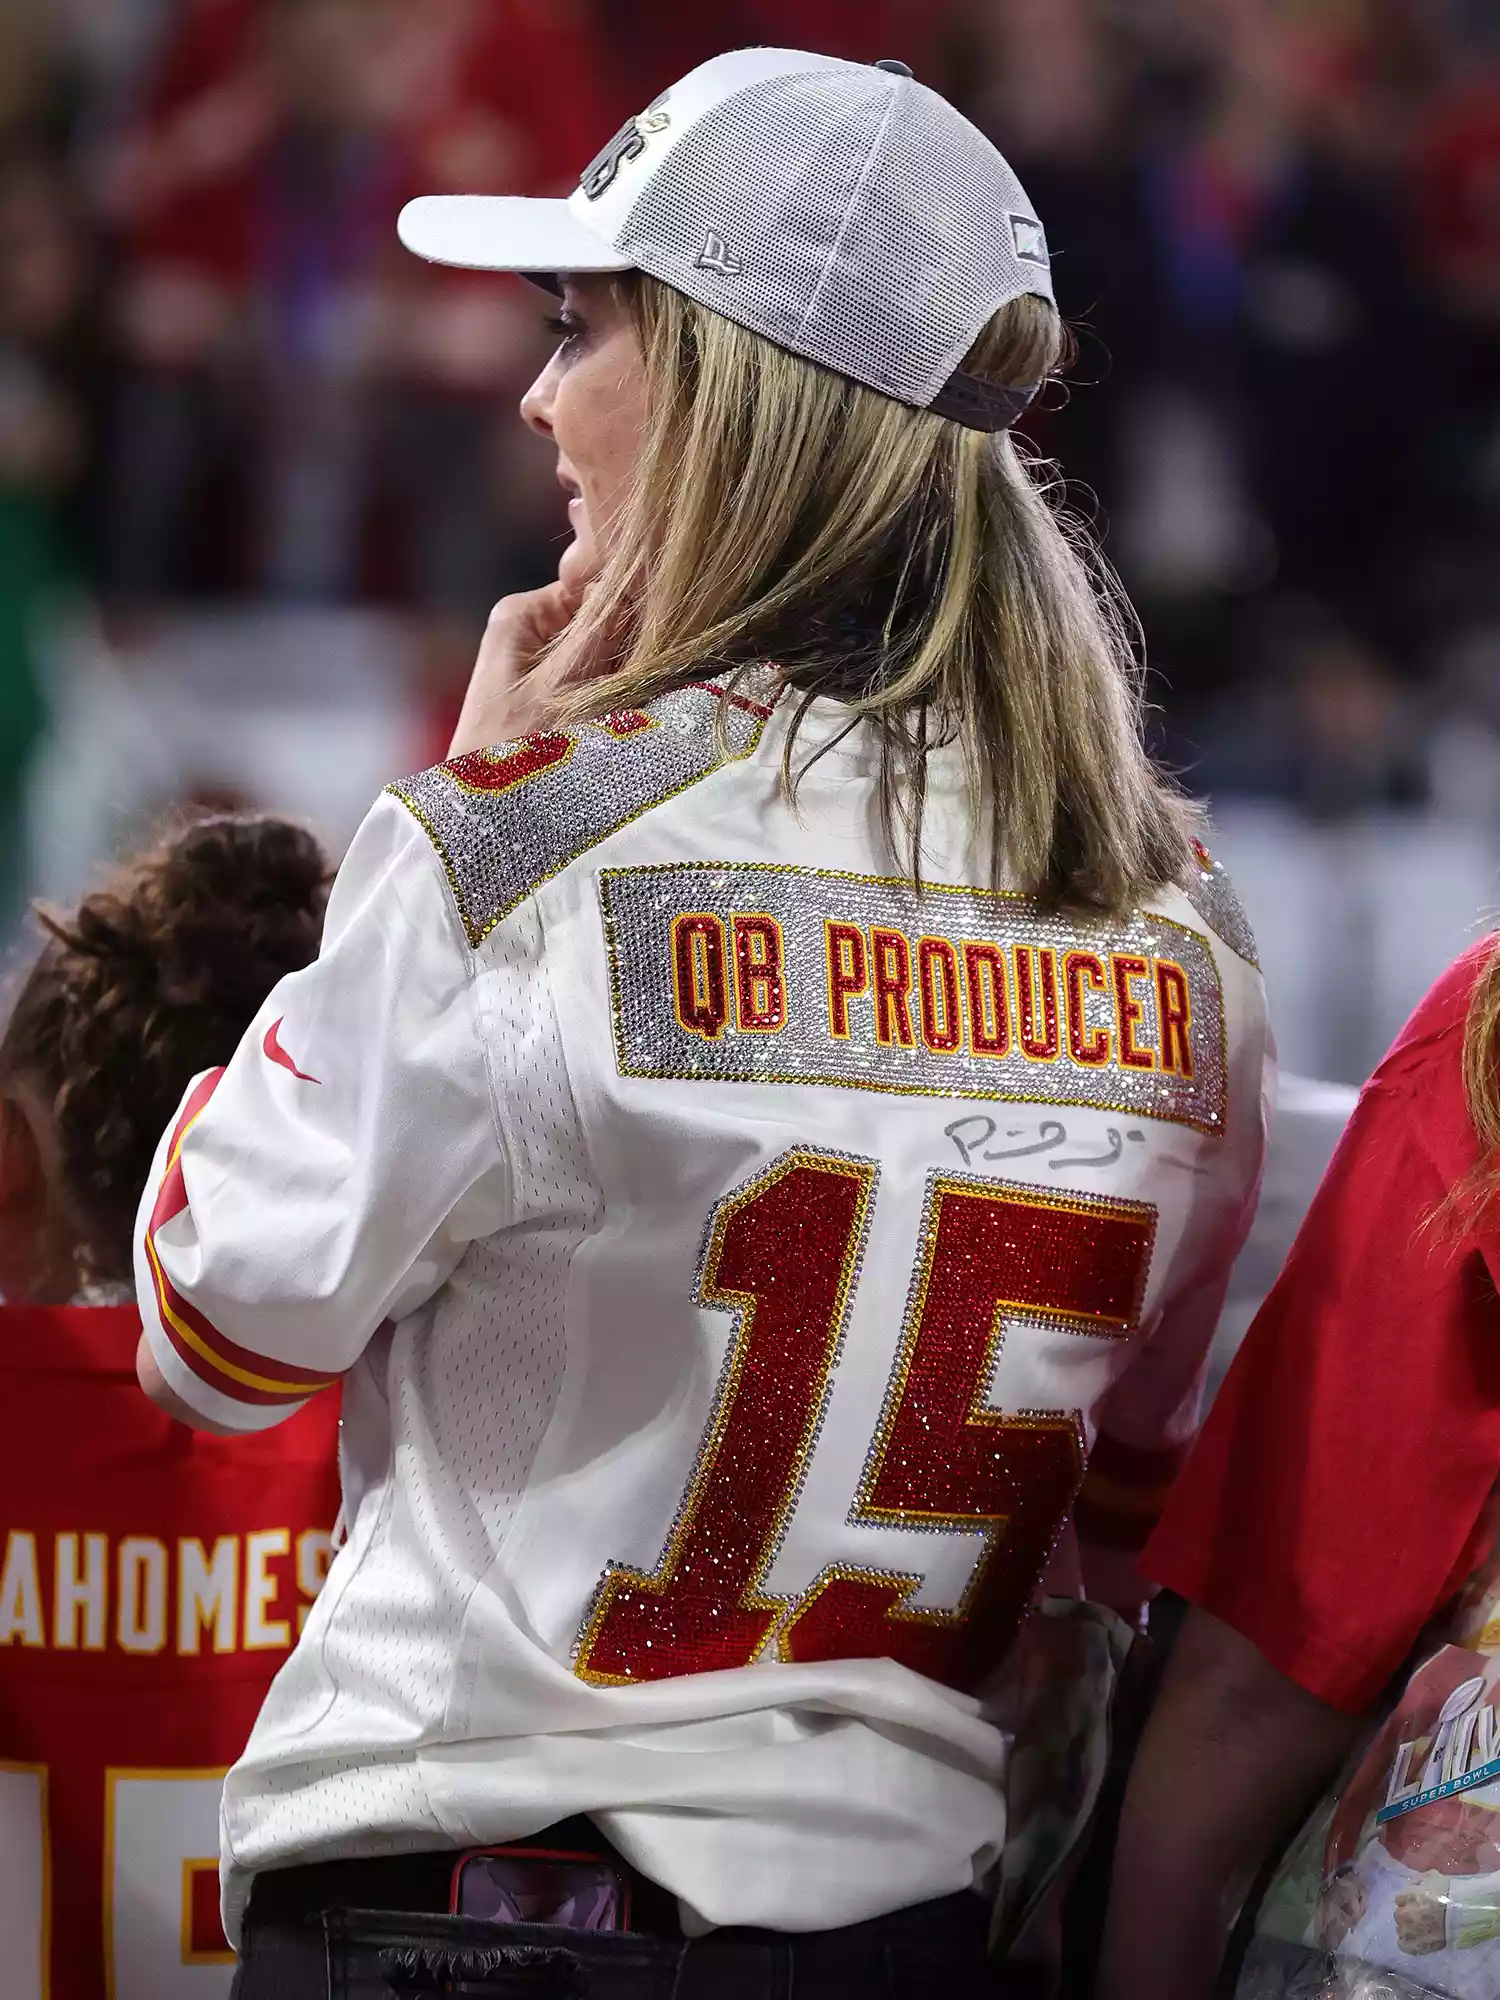 Patrick Mahomes mother, Randi Martin, looks on after the Kansas City Chiefs defeated the San Francisco 49ers 31-20 in Super Bowl LIV at Hard Rock Stadium on February 02, 2020 in Miami, Florida